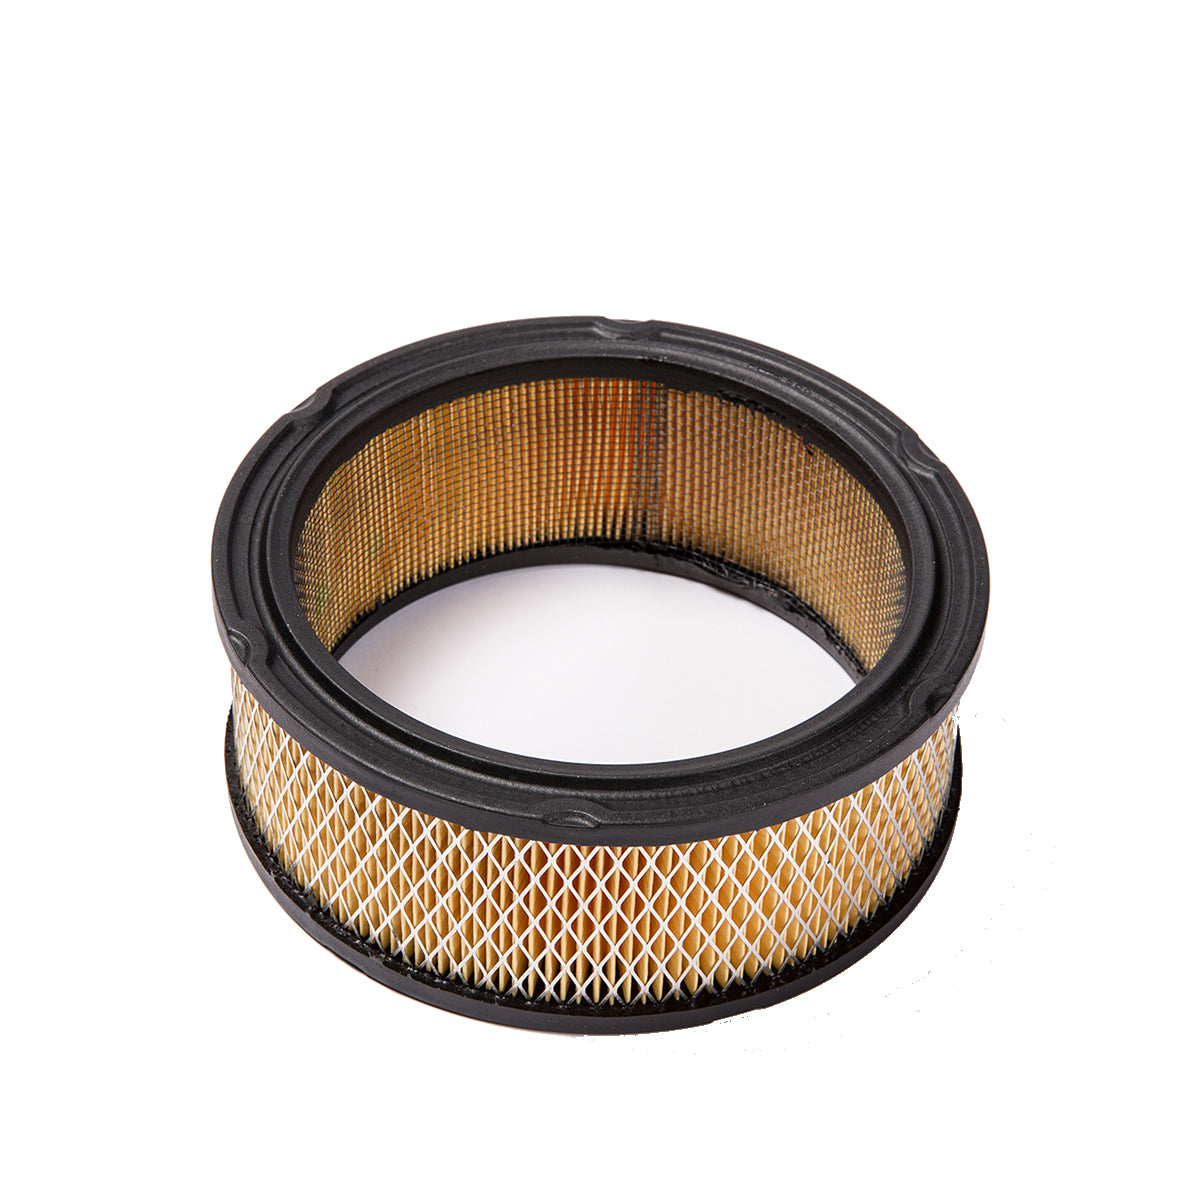 John Deere Air Filter For 200, 300,  F600, LX, RX And SX Riding Lawn Mowers